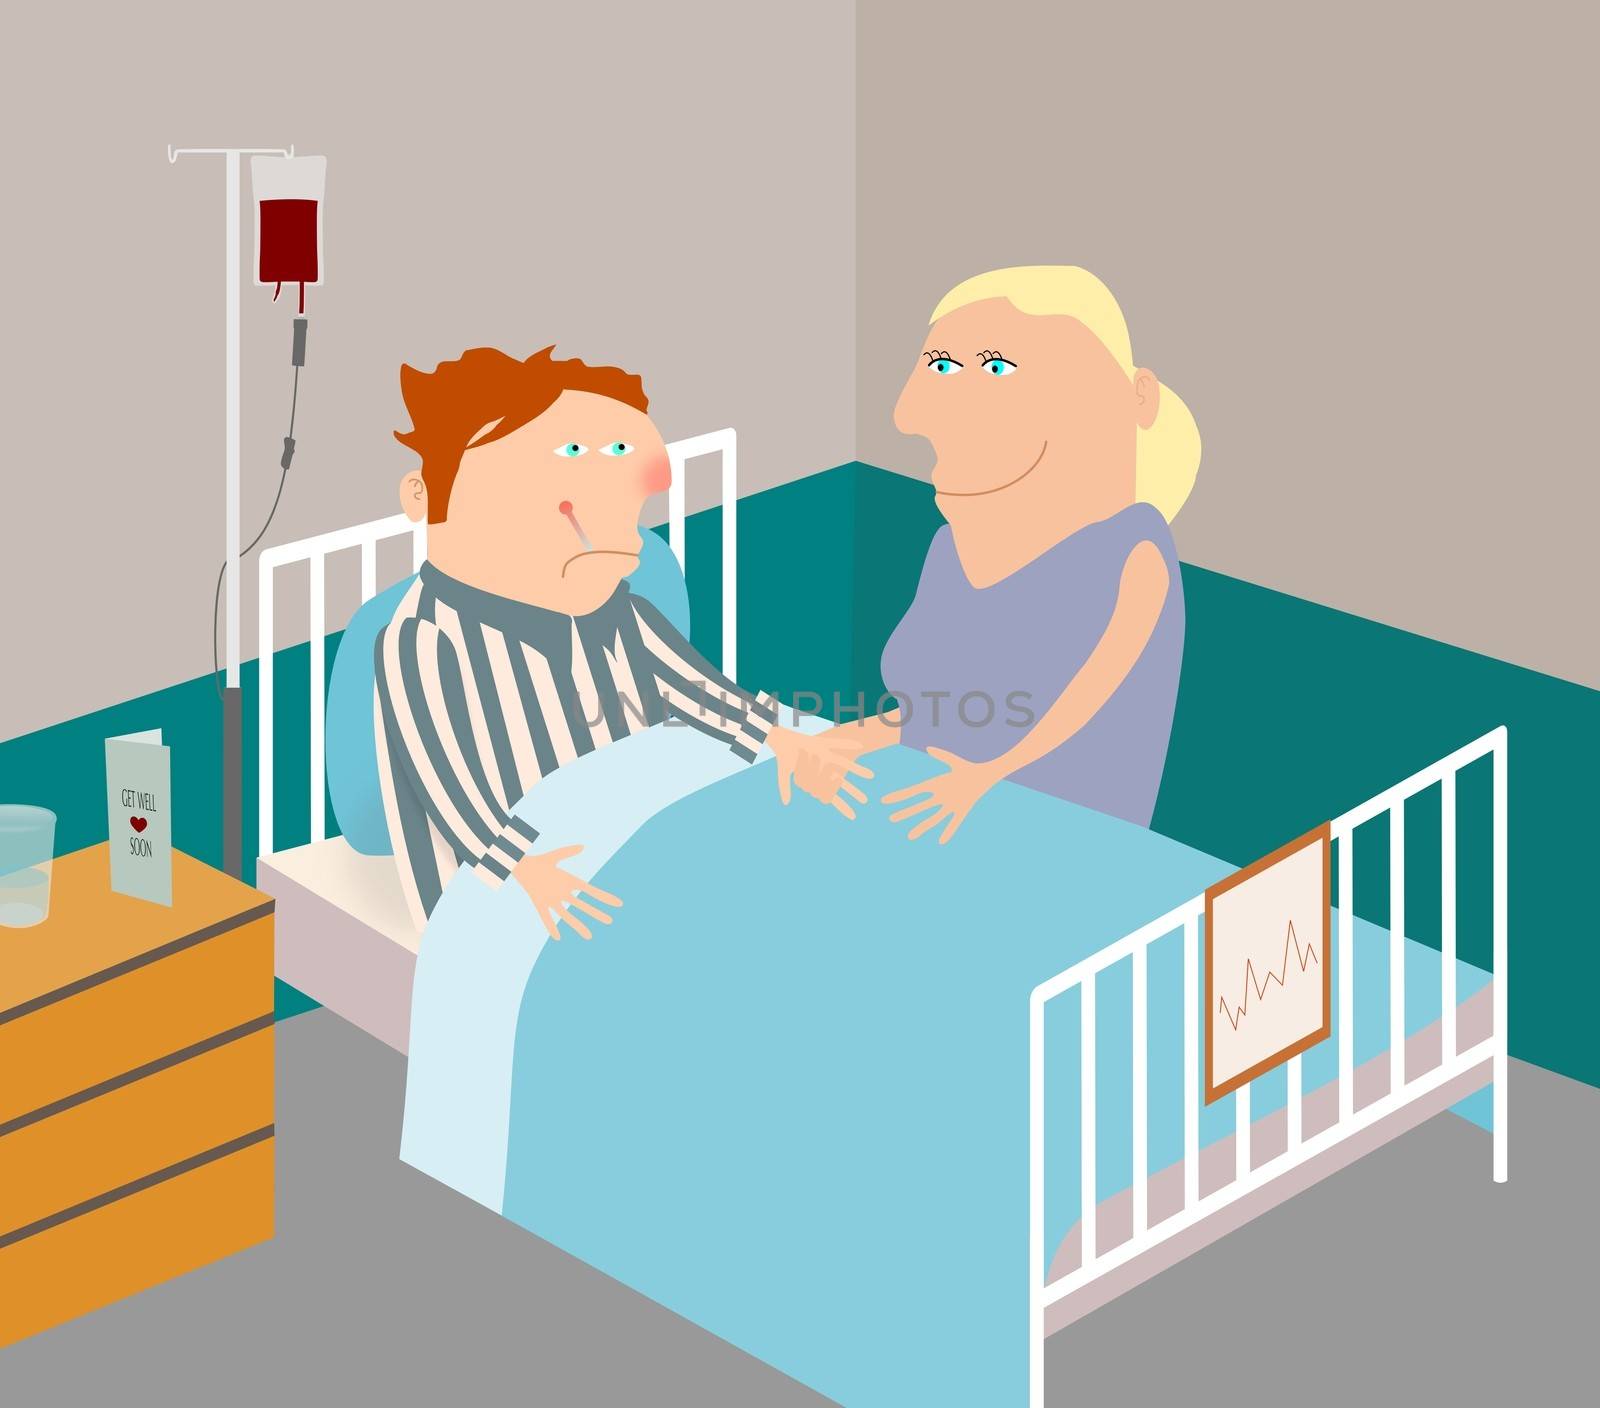 Illustration of a man in a hospital bed with a woman visiting him